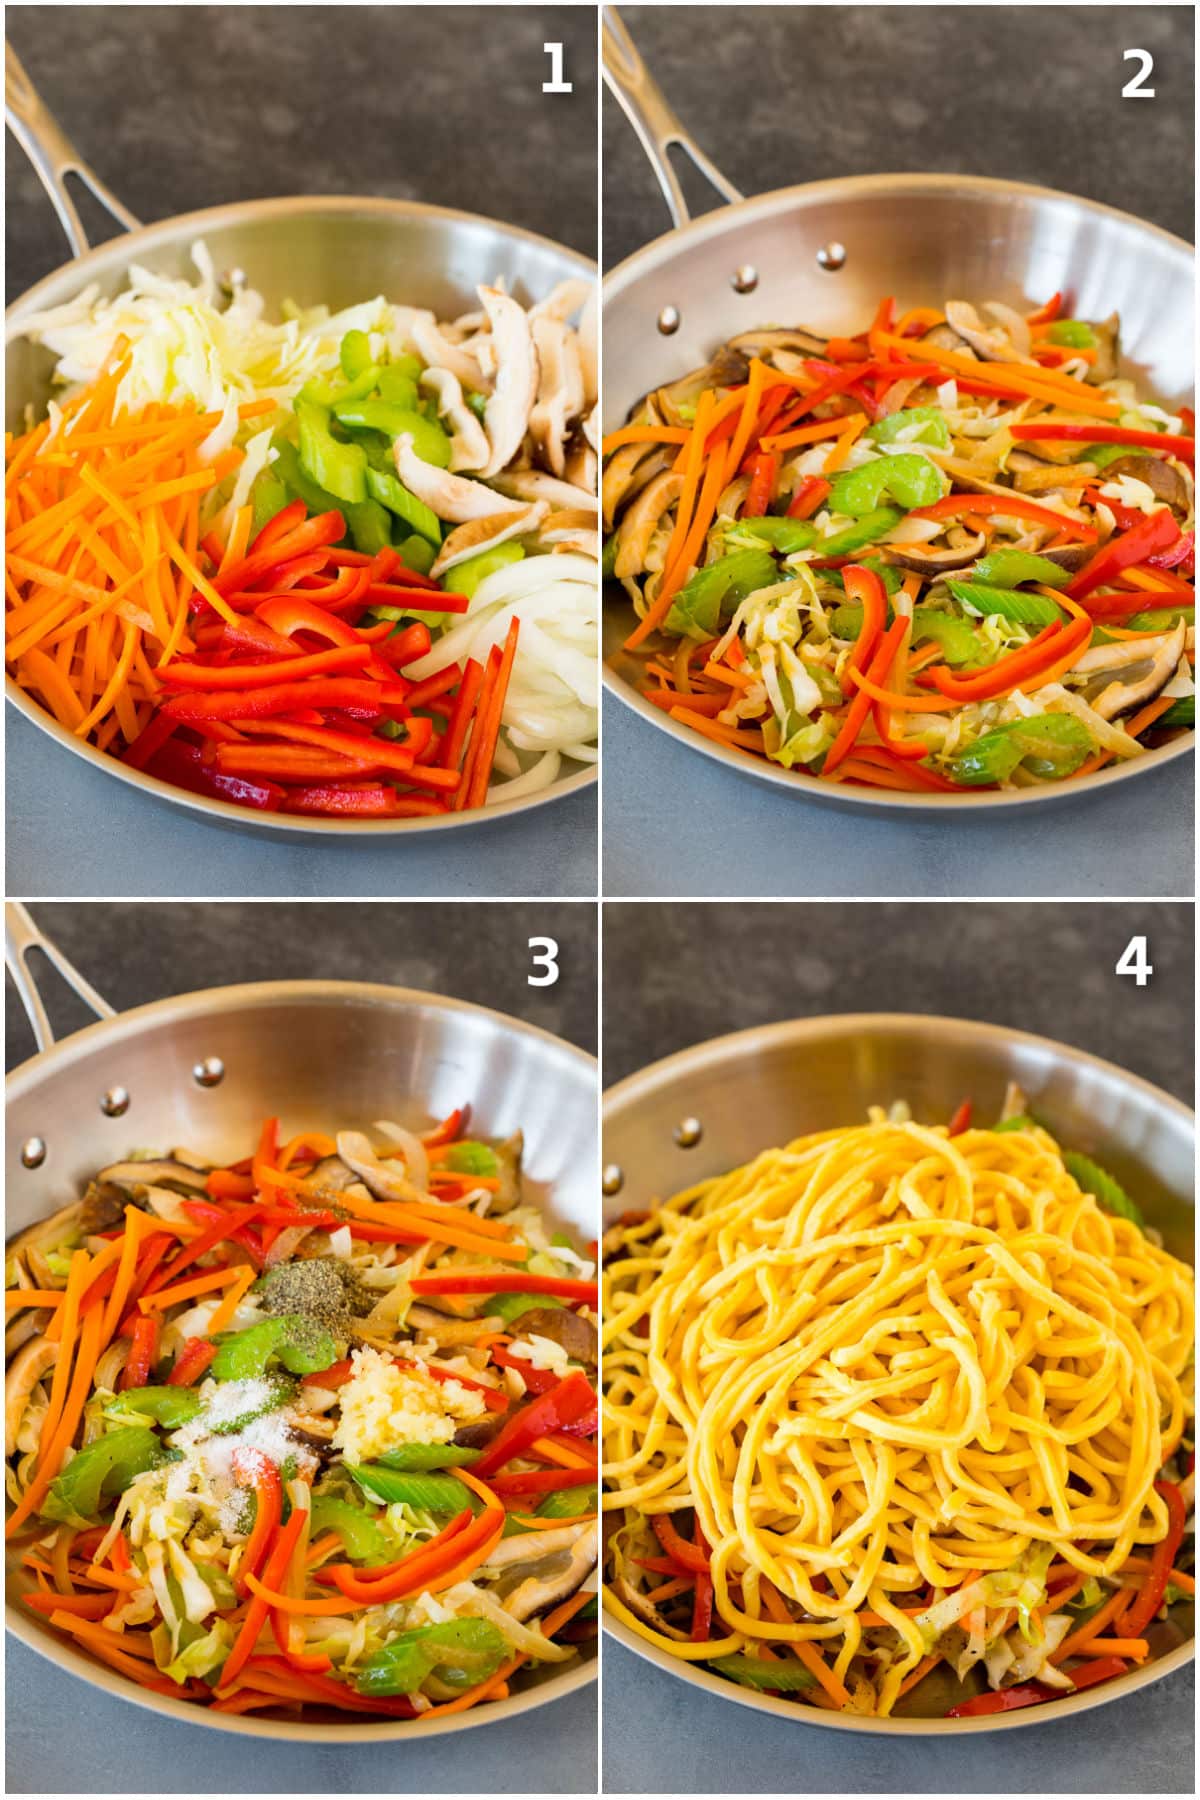 Step by step photos showing how to cook vegetables and noodles.